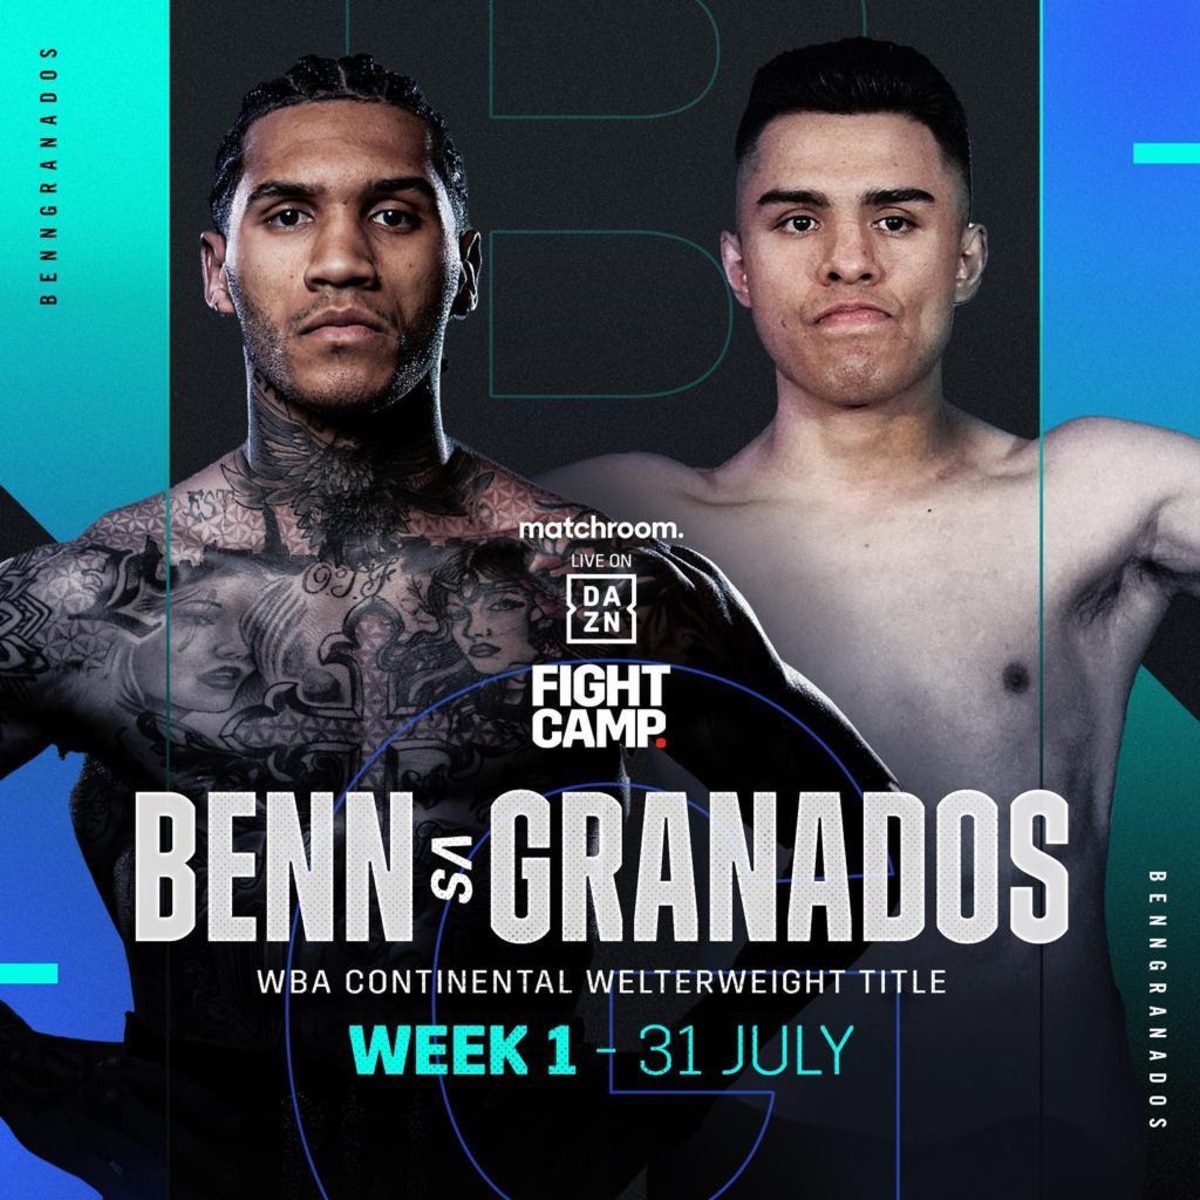 Conor Benn tests postive for COVID, off Saturday's Matchroom card on DAZN